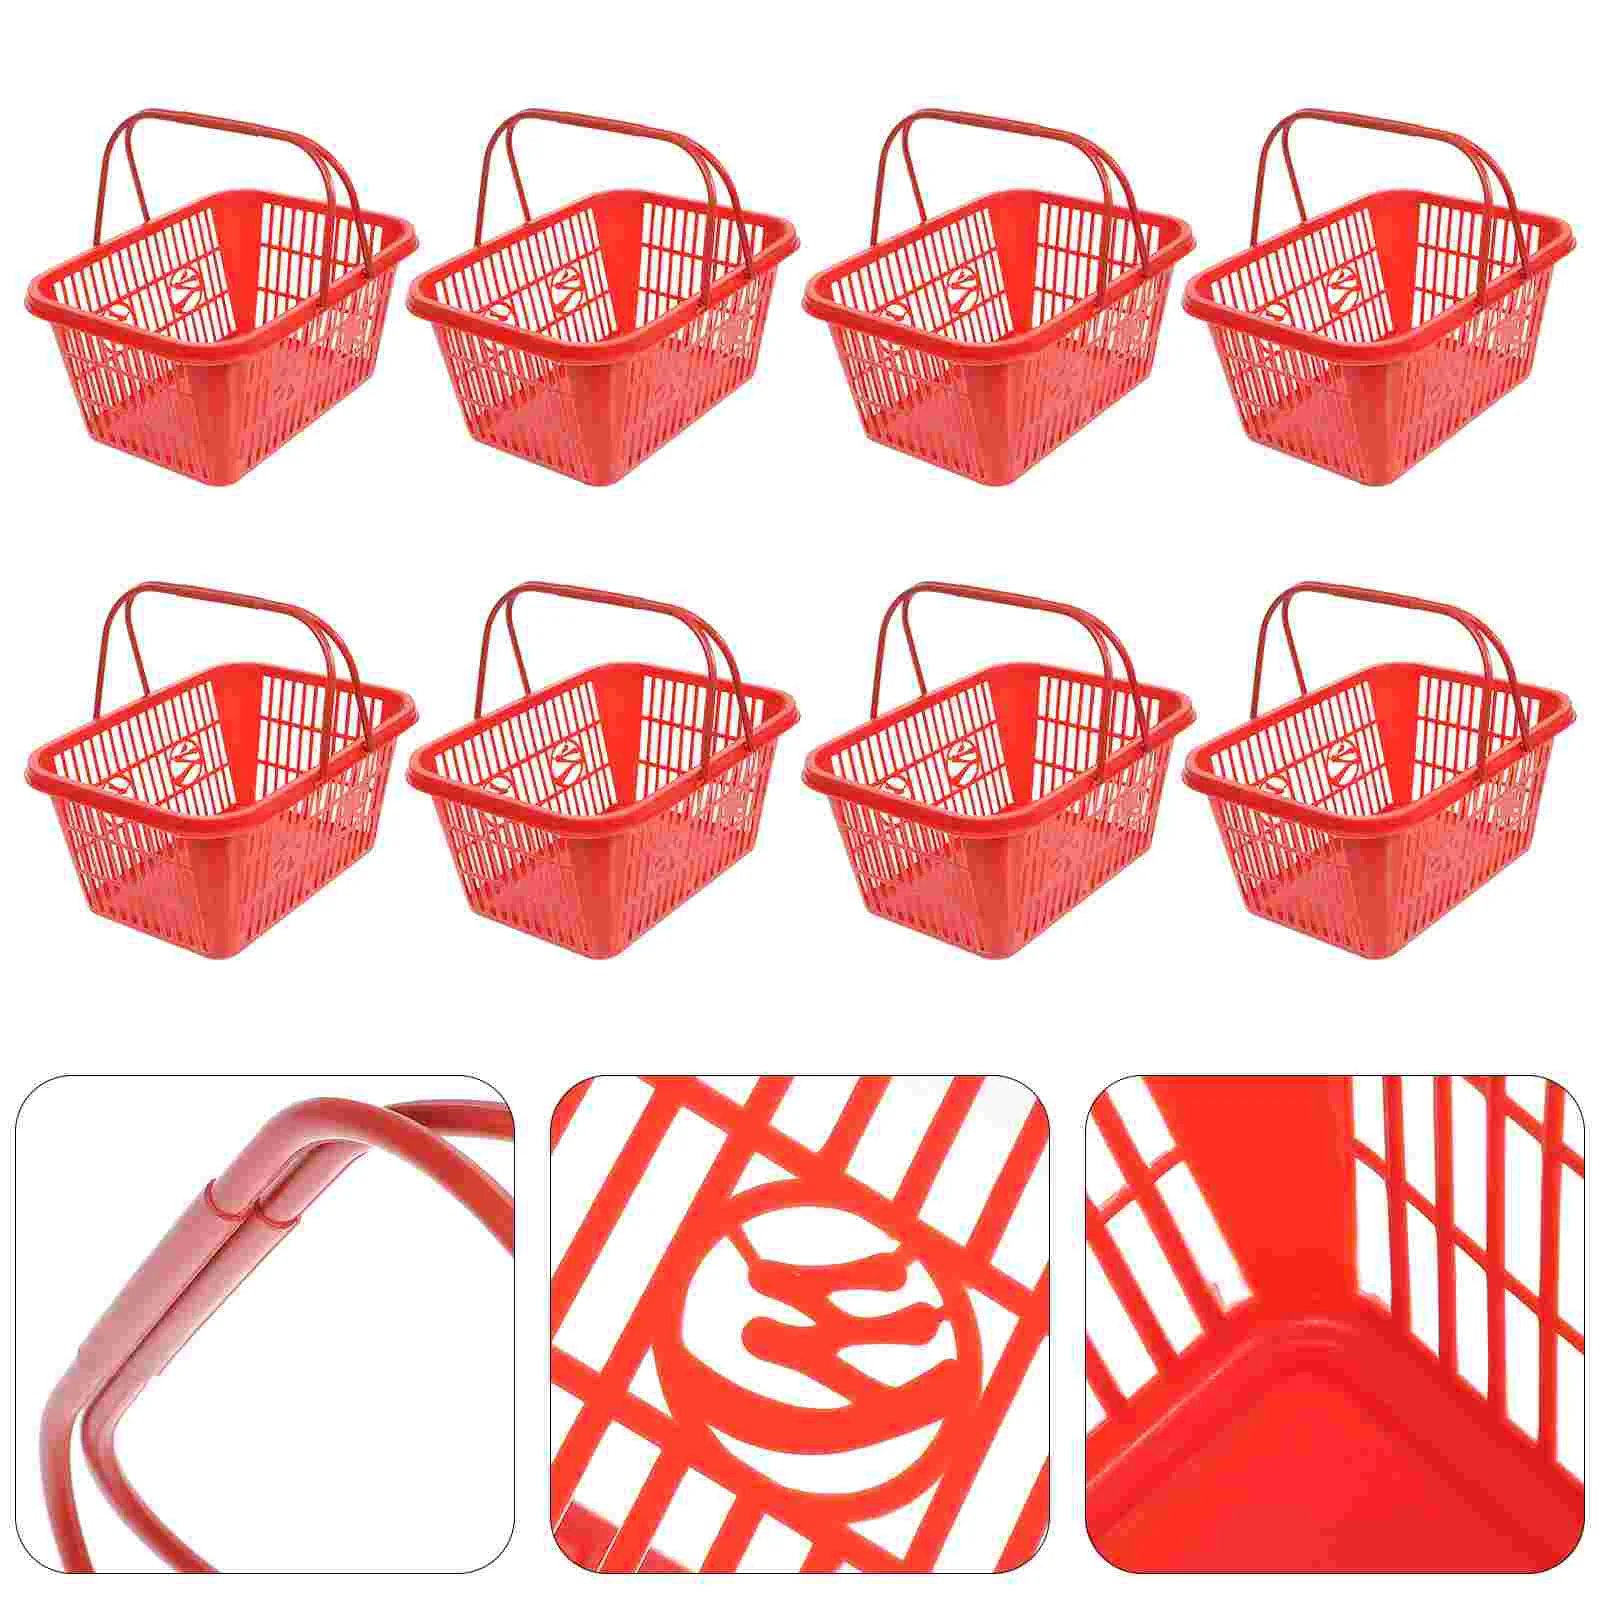 

8Pcs Fruit Baskets Fruits Vegetables Shopping Basket Grocery Play Basket Strawberry Baskets with Handle Red